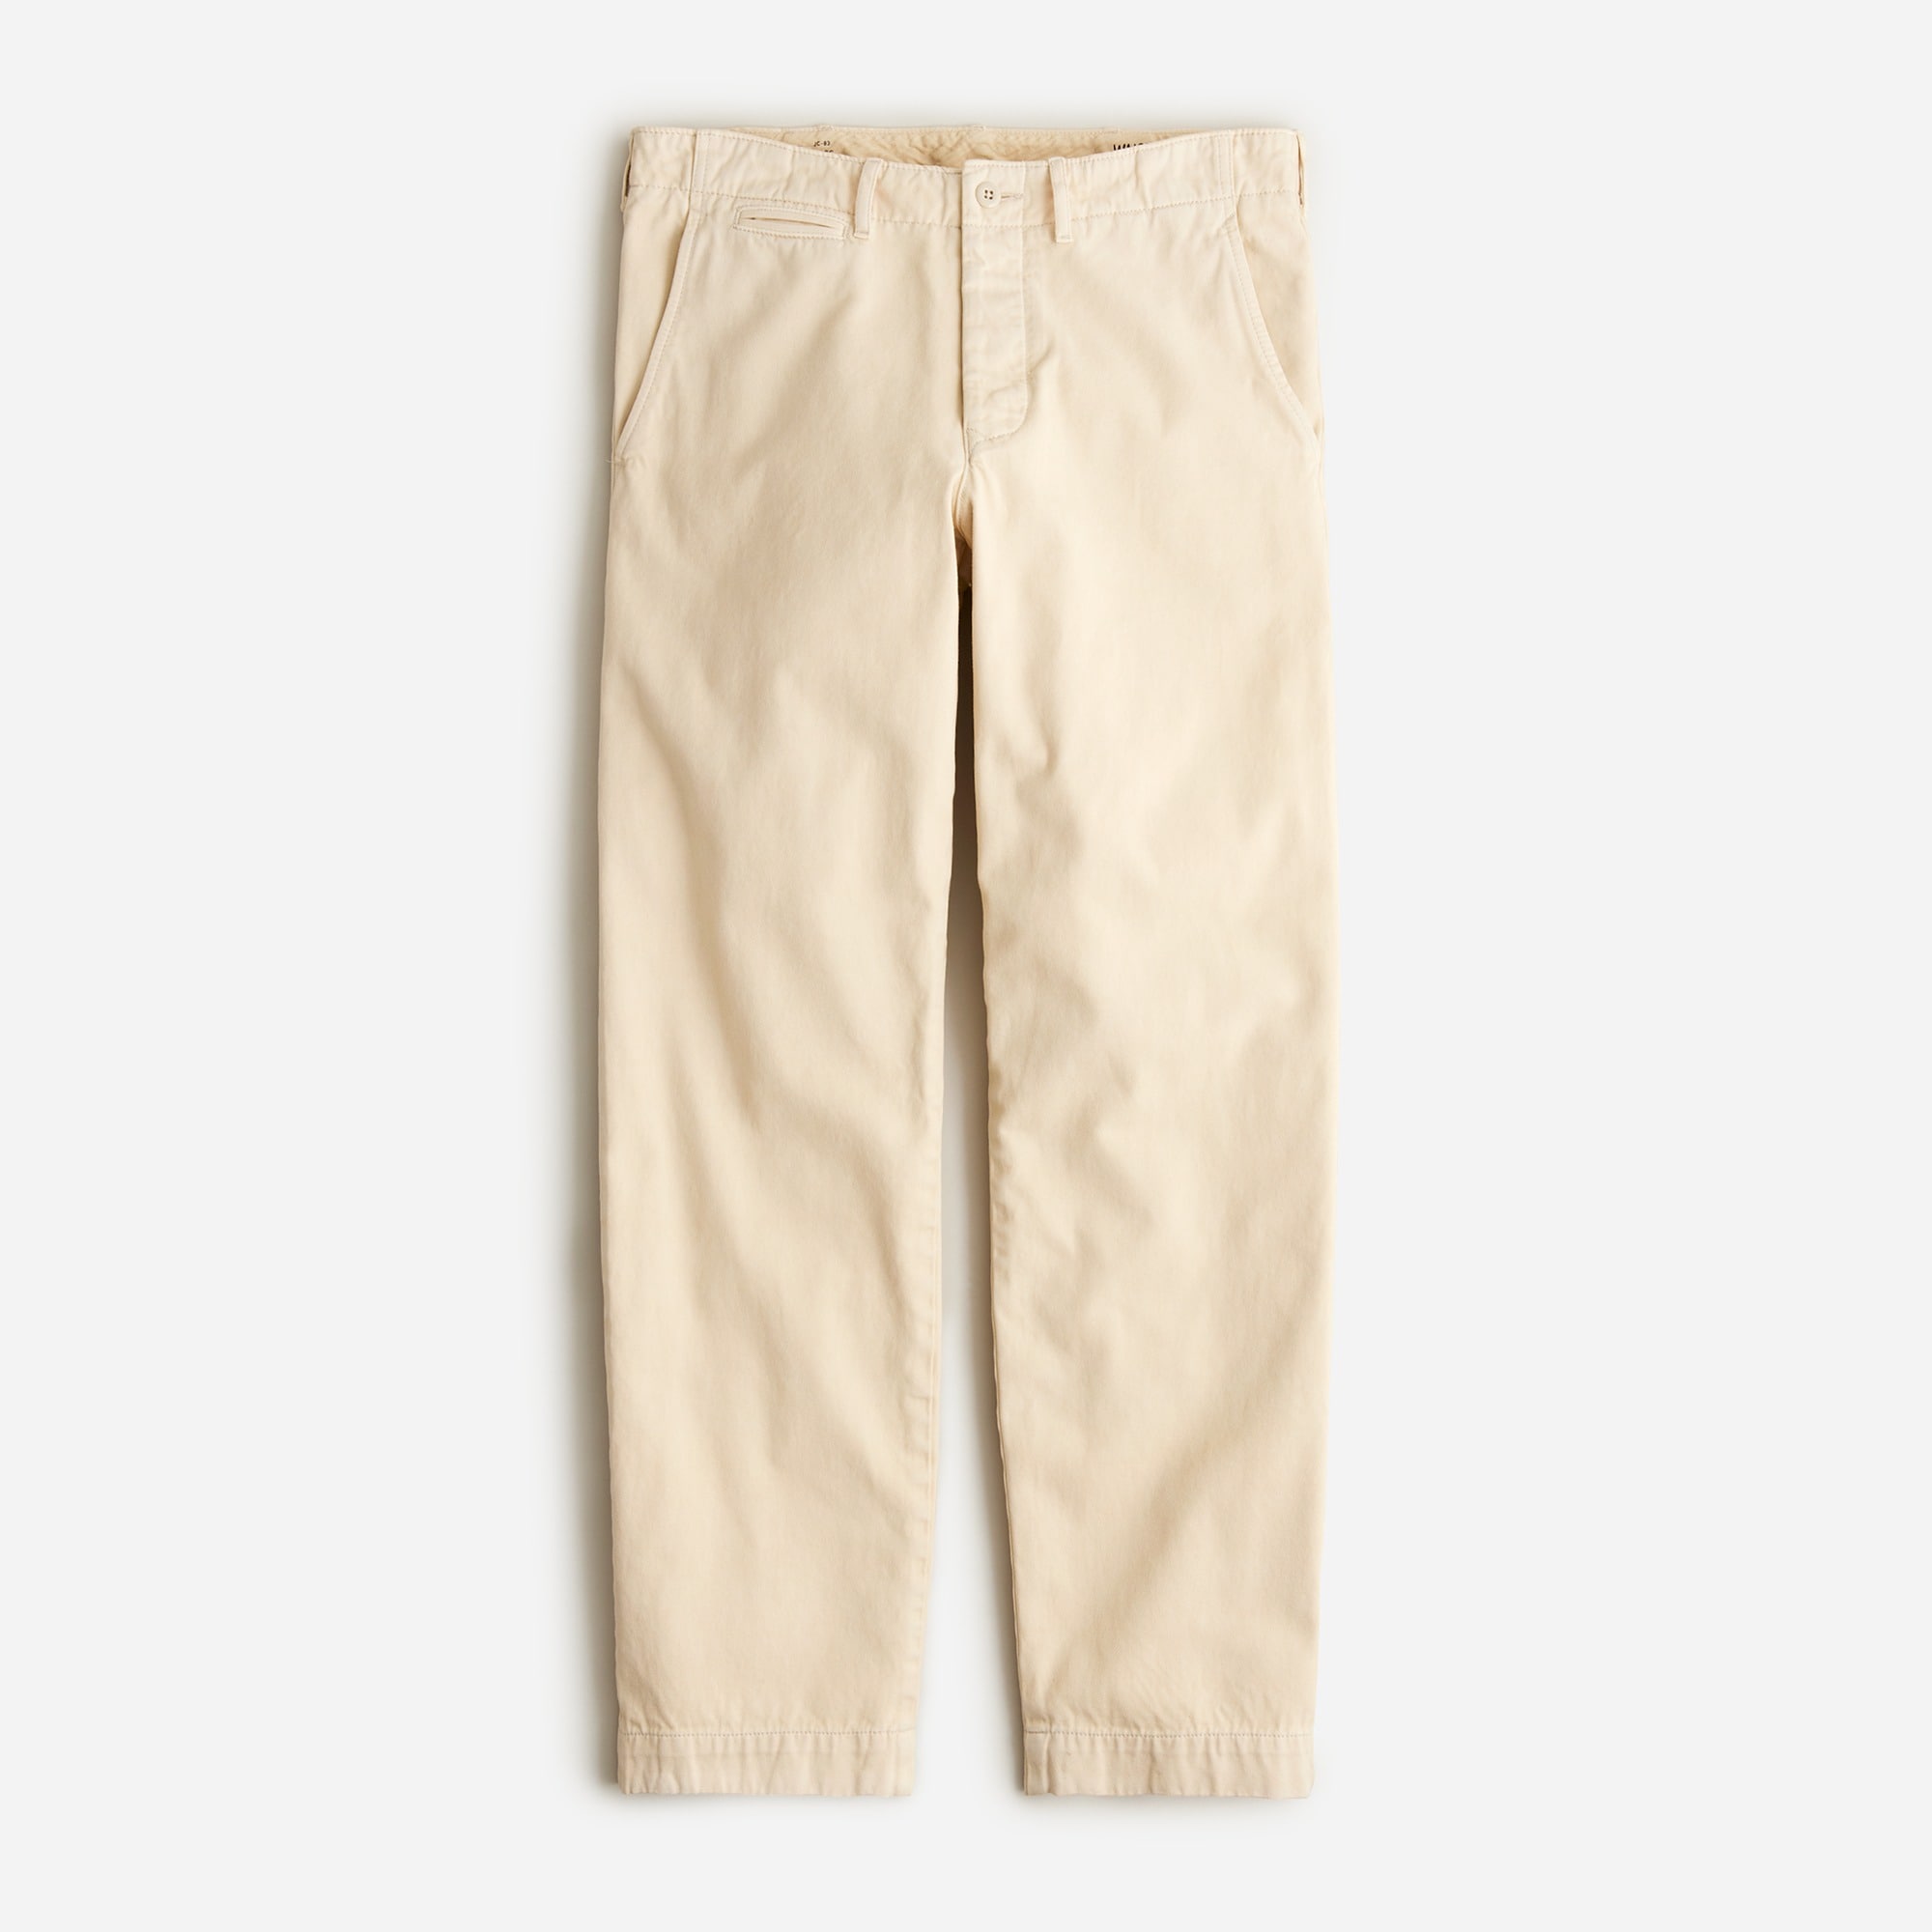 Jcrew Wallace u0026amp; Barnes selvedge officer chino pant